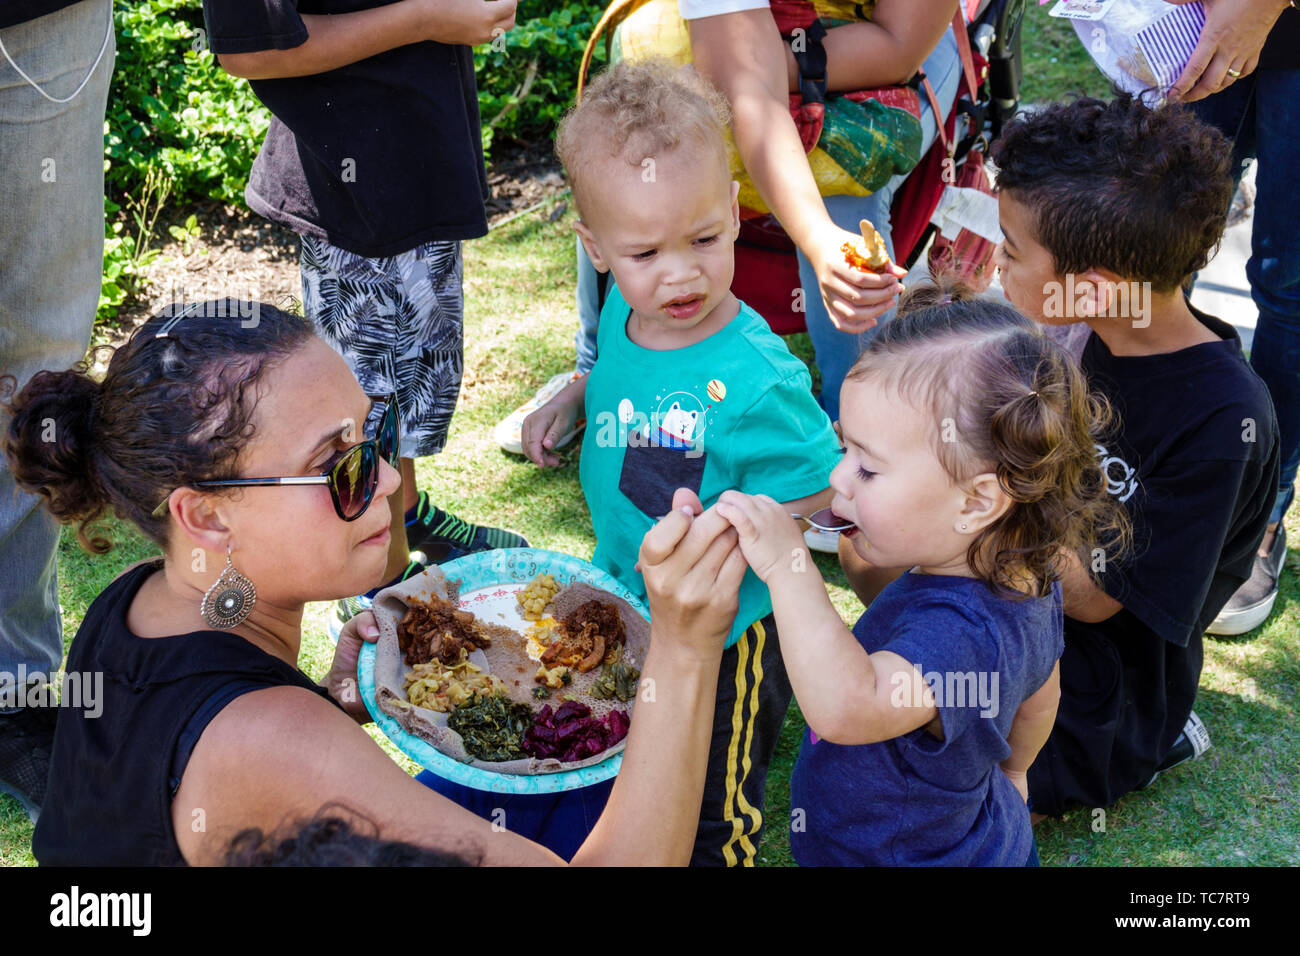 Miami Beach Florida,North Beach,Soul Vegan Festival,food,mother mom,daughter,son,toddler toddlers,feeding tasting eating,mixed race ethnicity,visitors Stock Photo